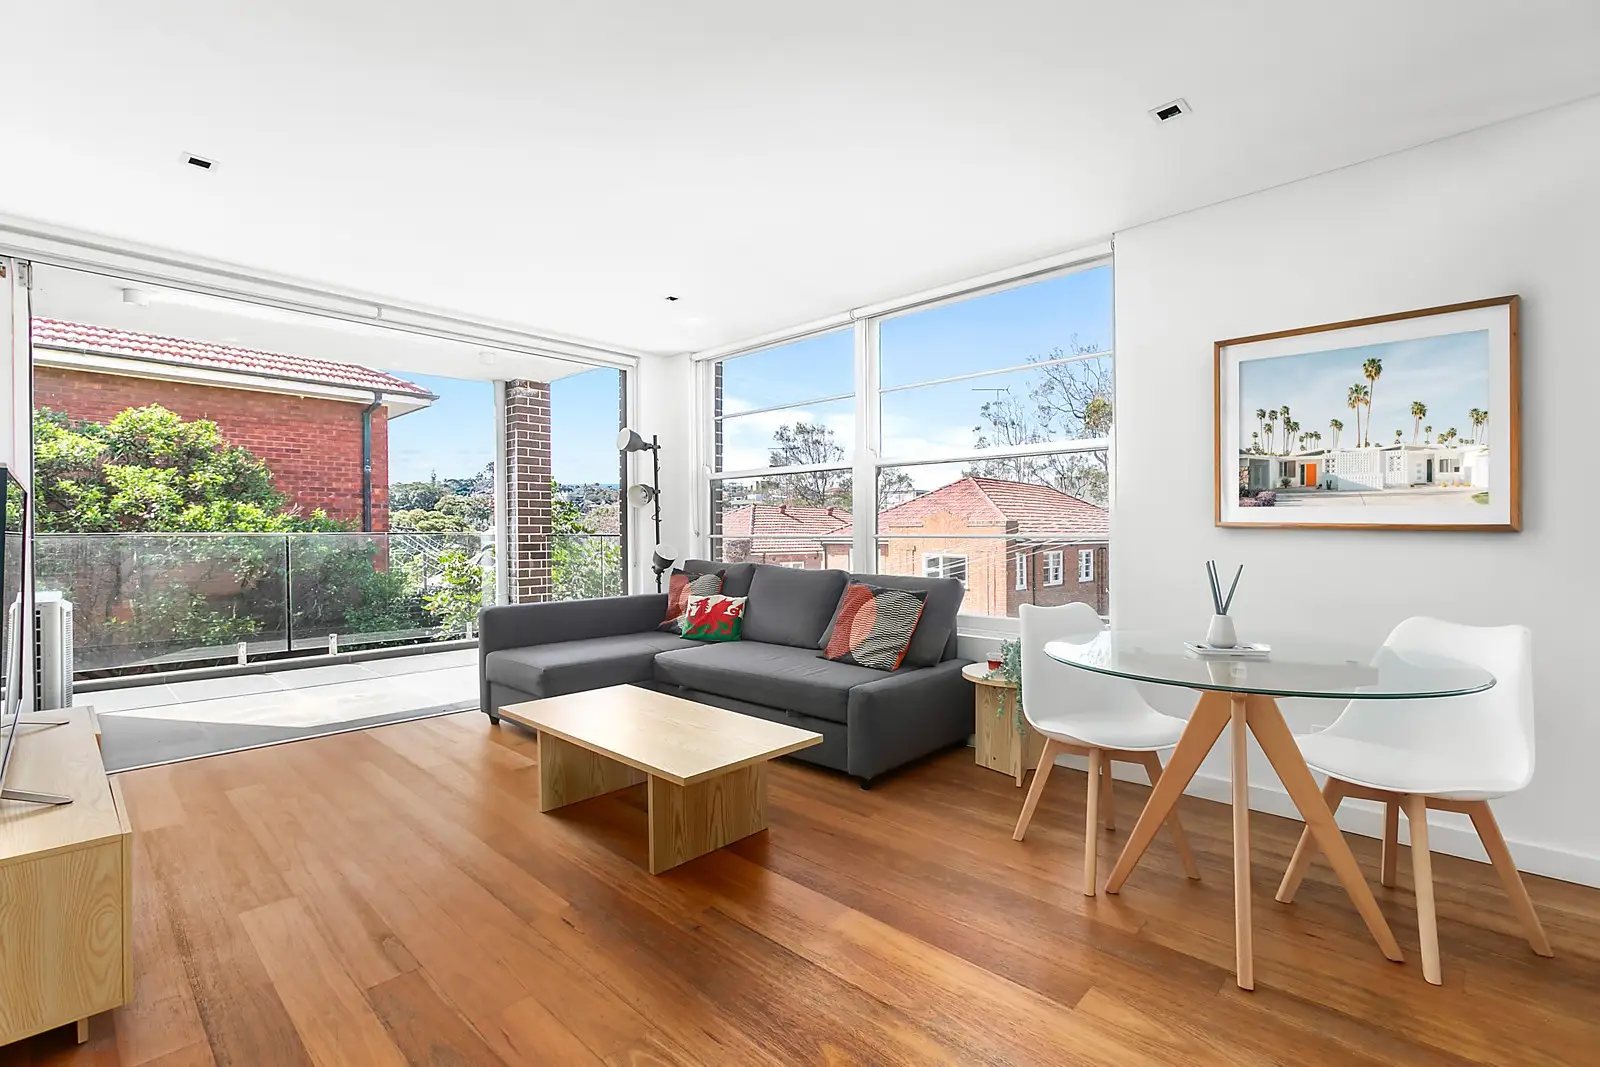 Photo #1: 6/9 Glenwood Avenue, Coogee - Sold by Sydney Sotheby's International Realty